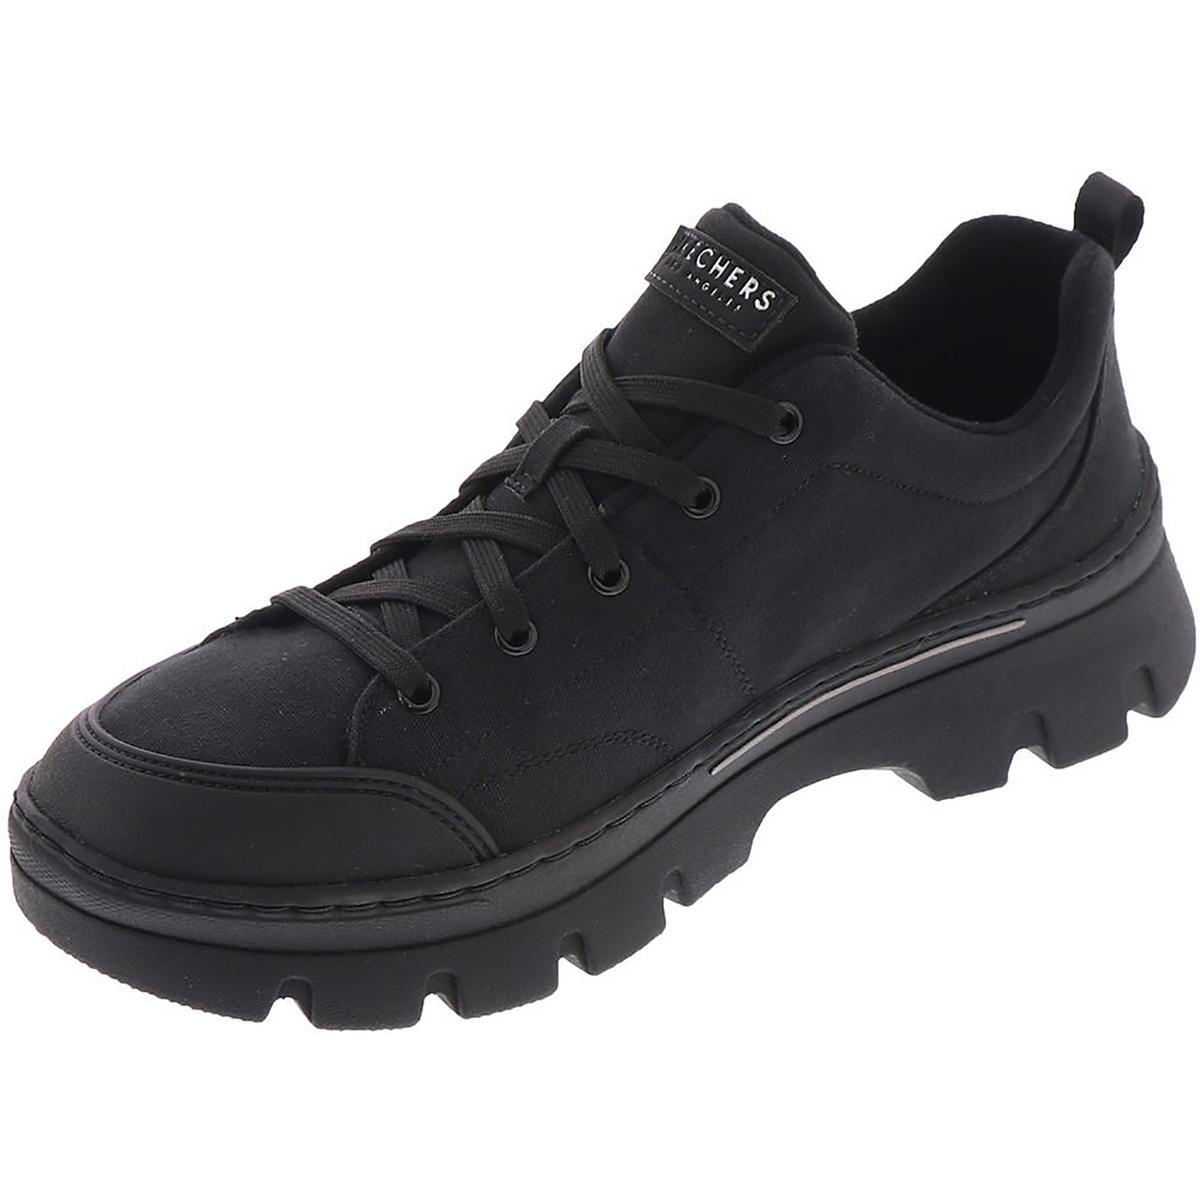 Skechers Roadies Surge Womens Air-Cooled Lifestyle Athletic and Training Shoes